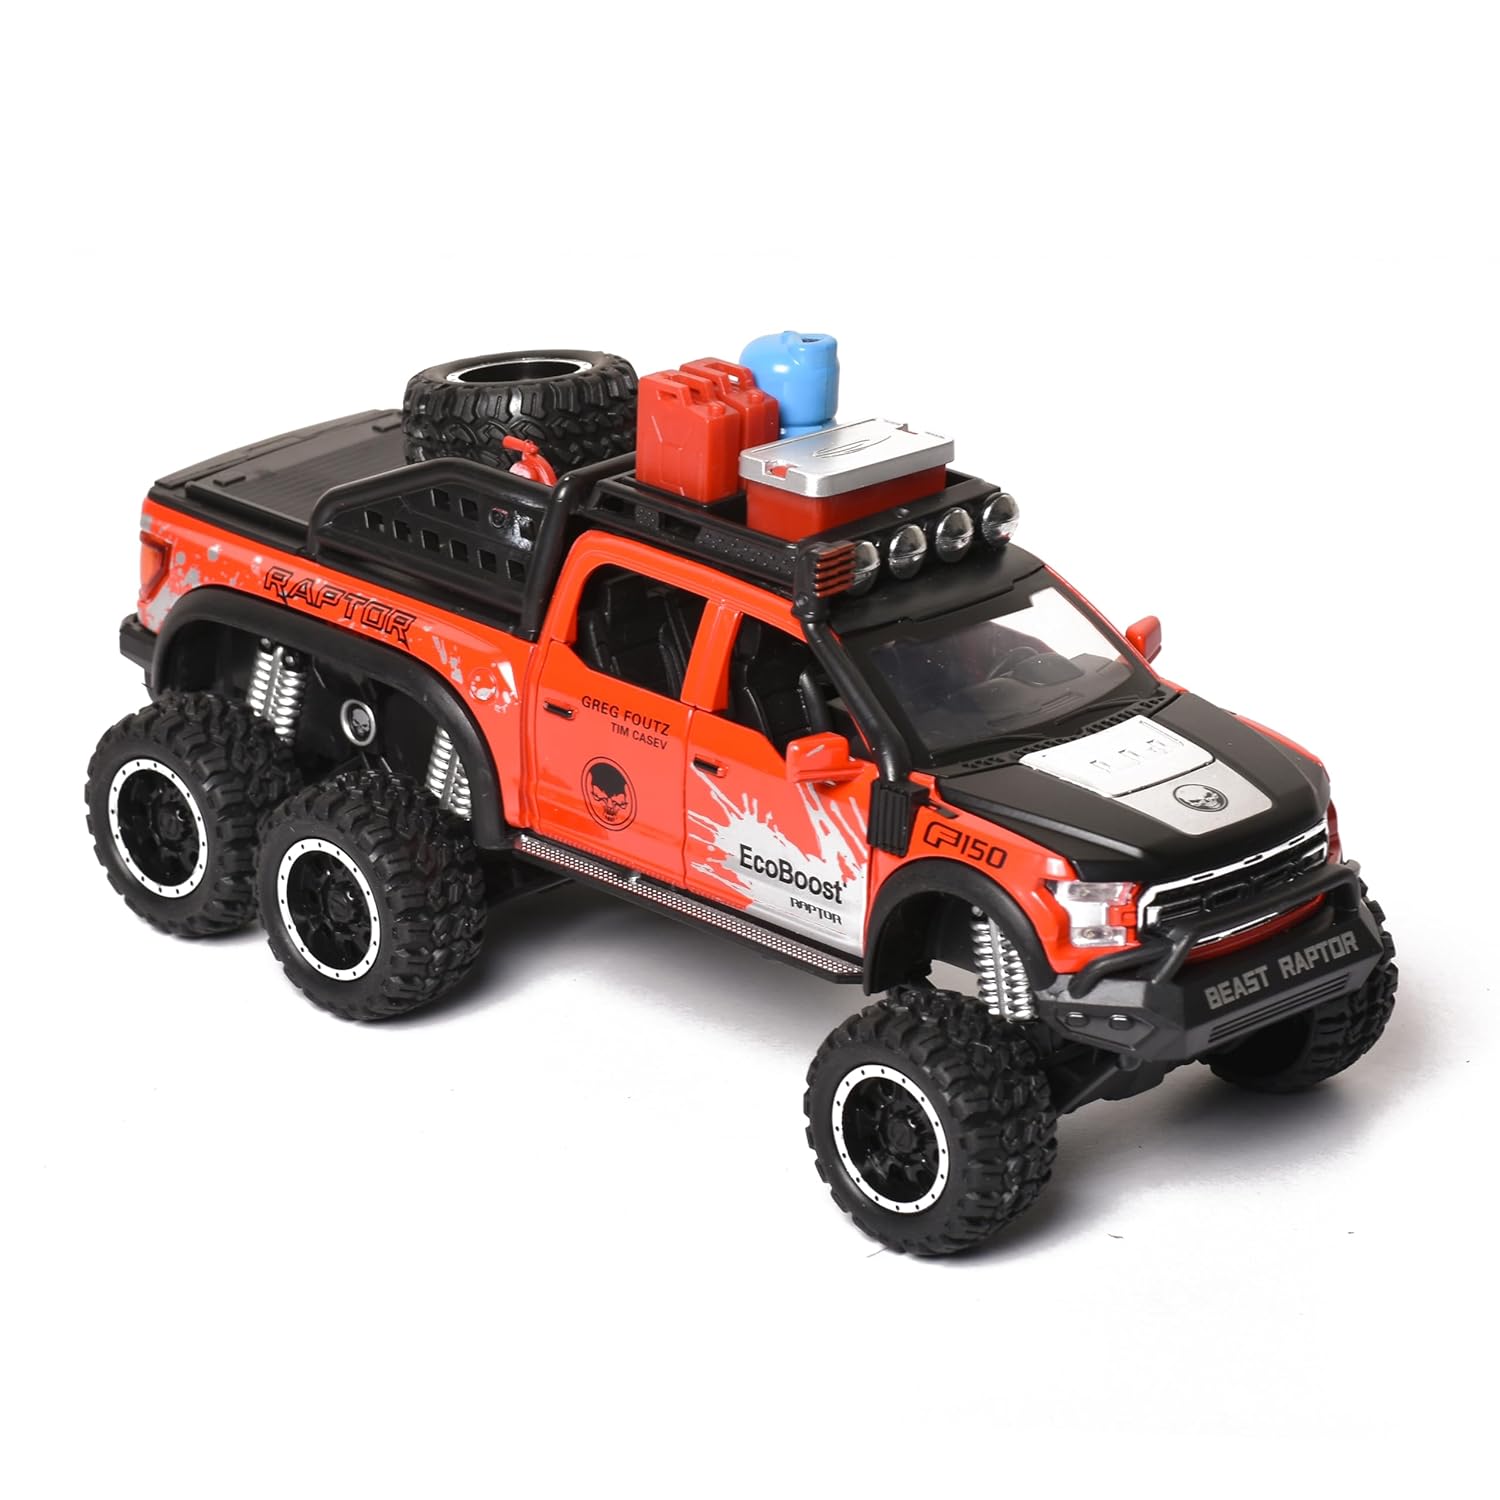 Braintastic F150 Raptor Diecast Spray Metal Model Pickup Car Truck Toys with Doors Open Sound and Light for Kids Age 3+ Year